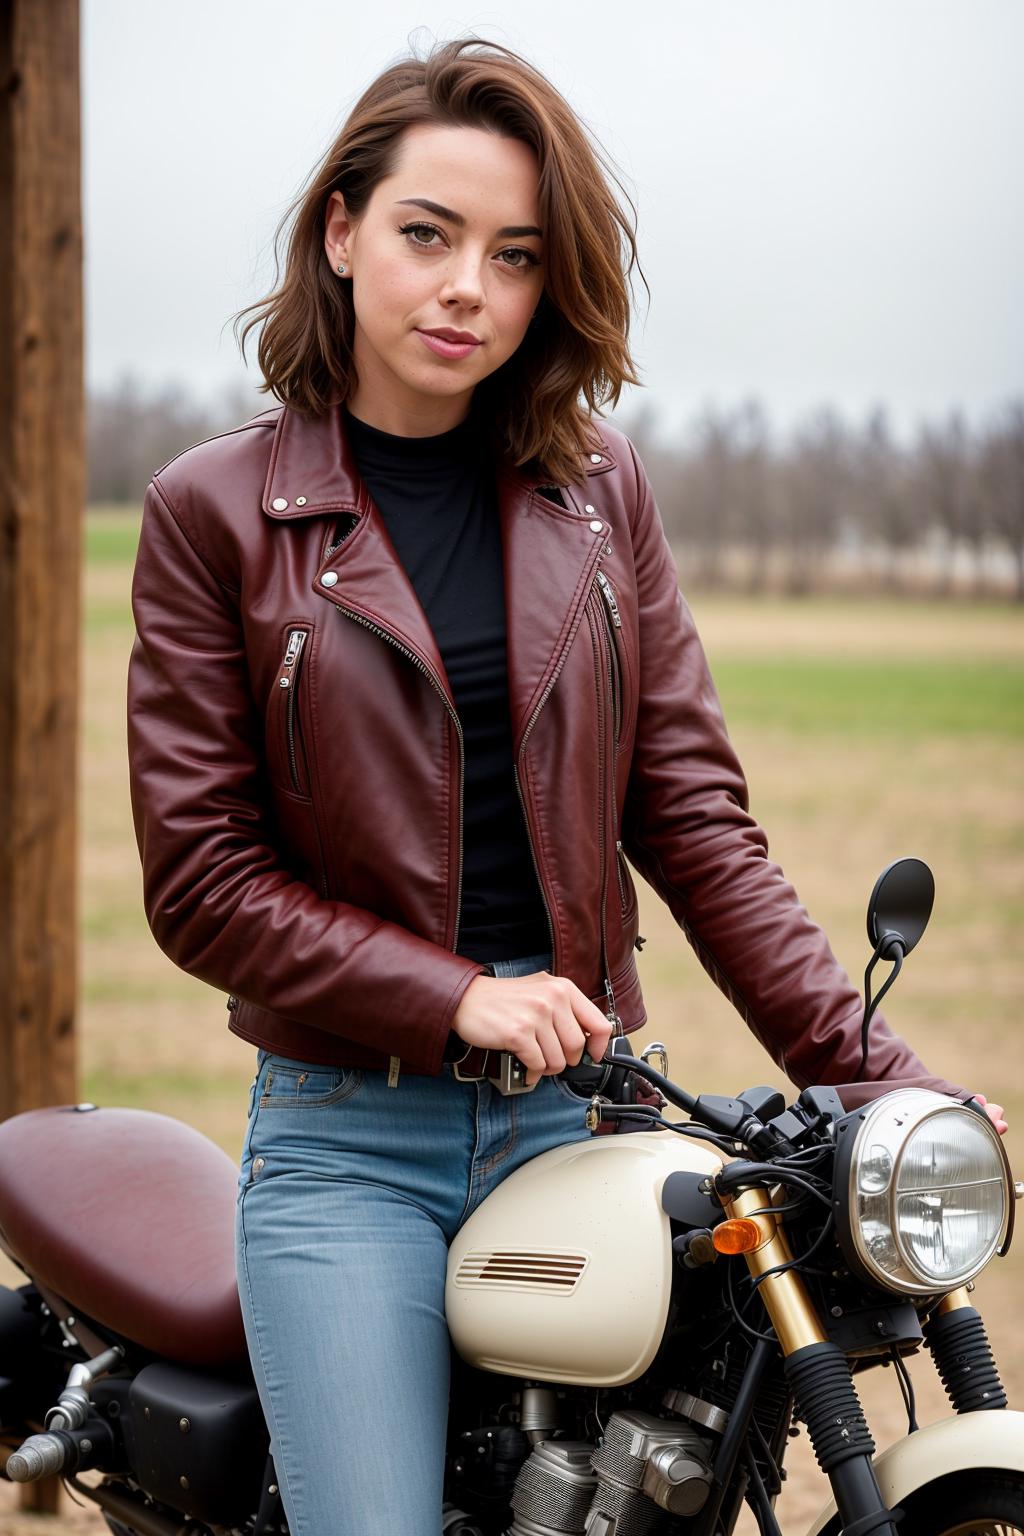 A woman wearing a leather jacket poses with a motorcycle.